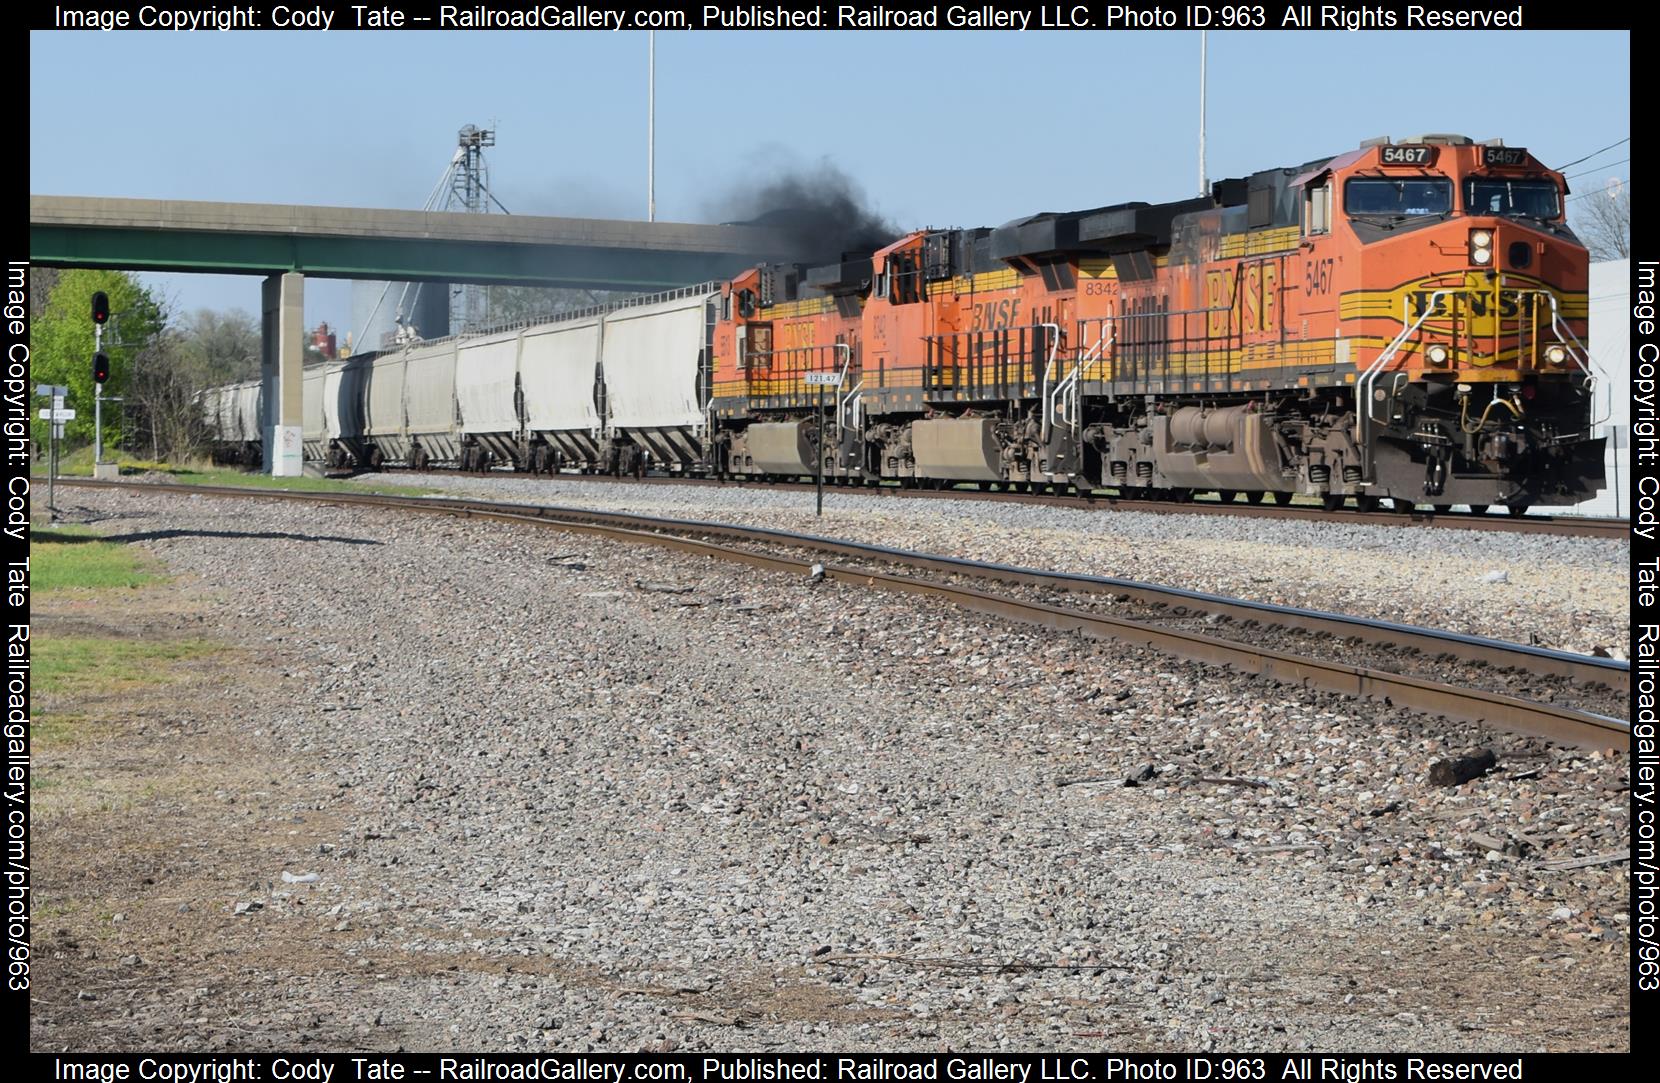 BNSF 5467 is a class C44-9W and  is pictured in Centralia, Illinois, USA.  This was taken along the Centralia subdivision  on the BNSF Railway. Photo Copyright: Cody  Tate uploaded to Railroad Gallery on 04/15/2023. This photograph of BNSF 5467 was taken on Saturday, April 15, 2023. All Rights Reserved. 